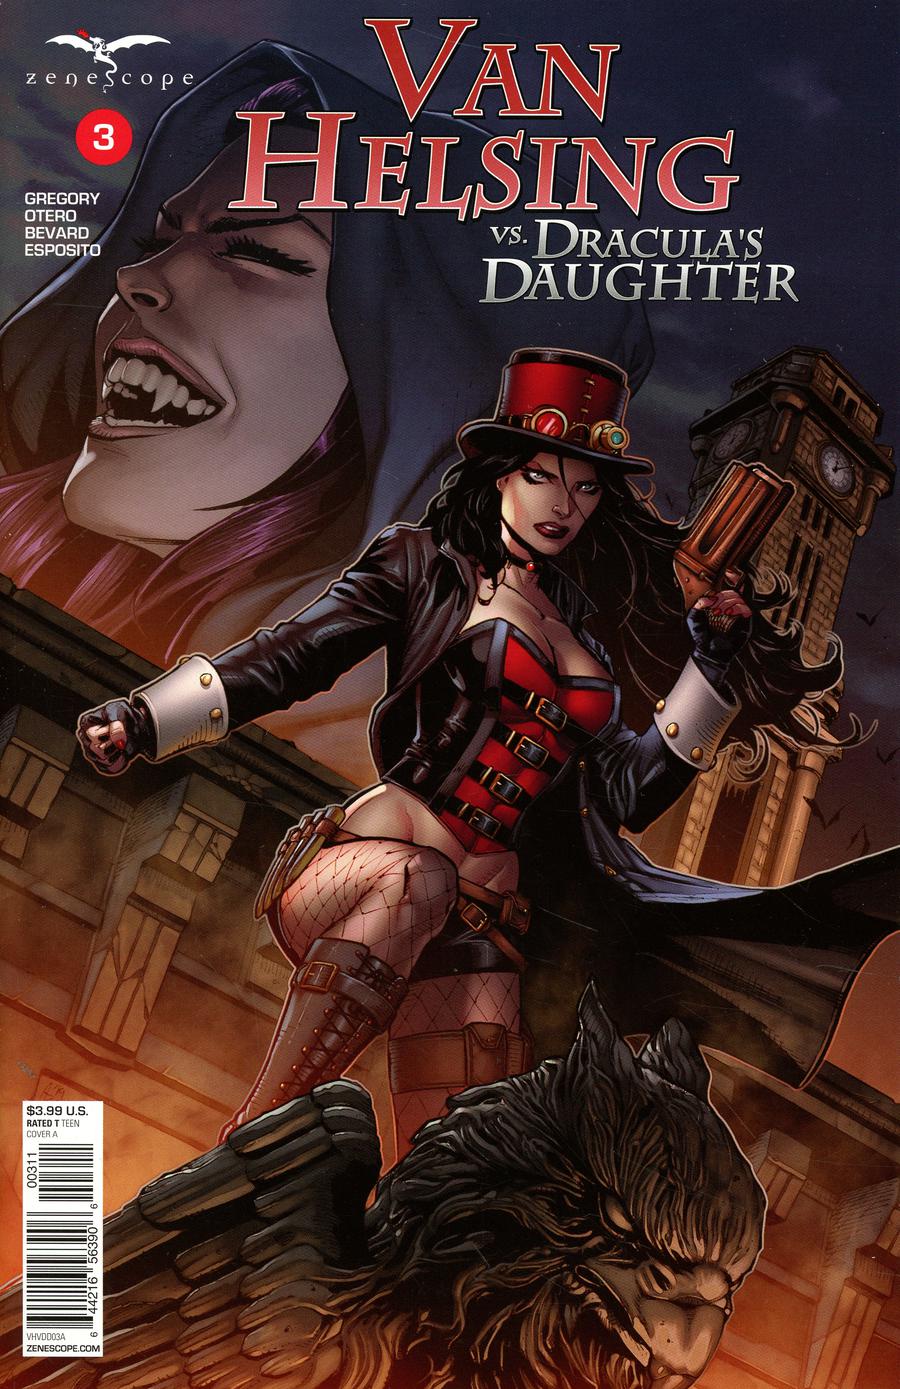 Grimm Fairy Tales Presents Van Helsing vs Draculas Daughter #3 Cover A Anthony Spay